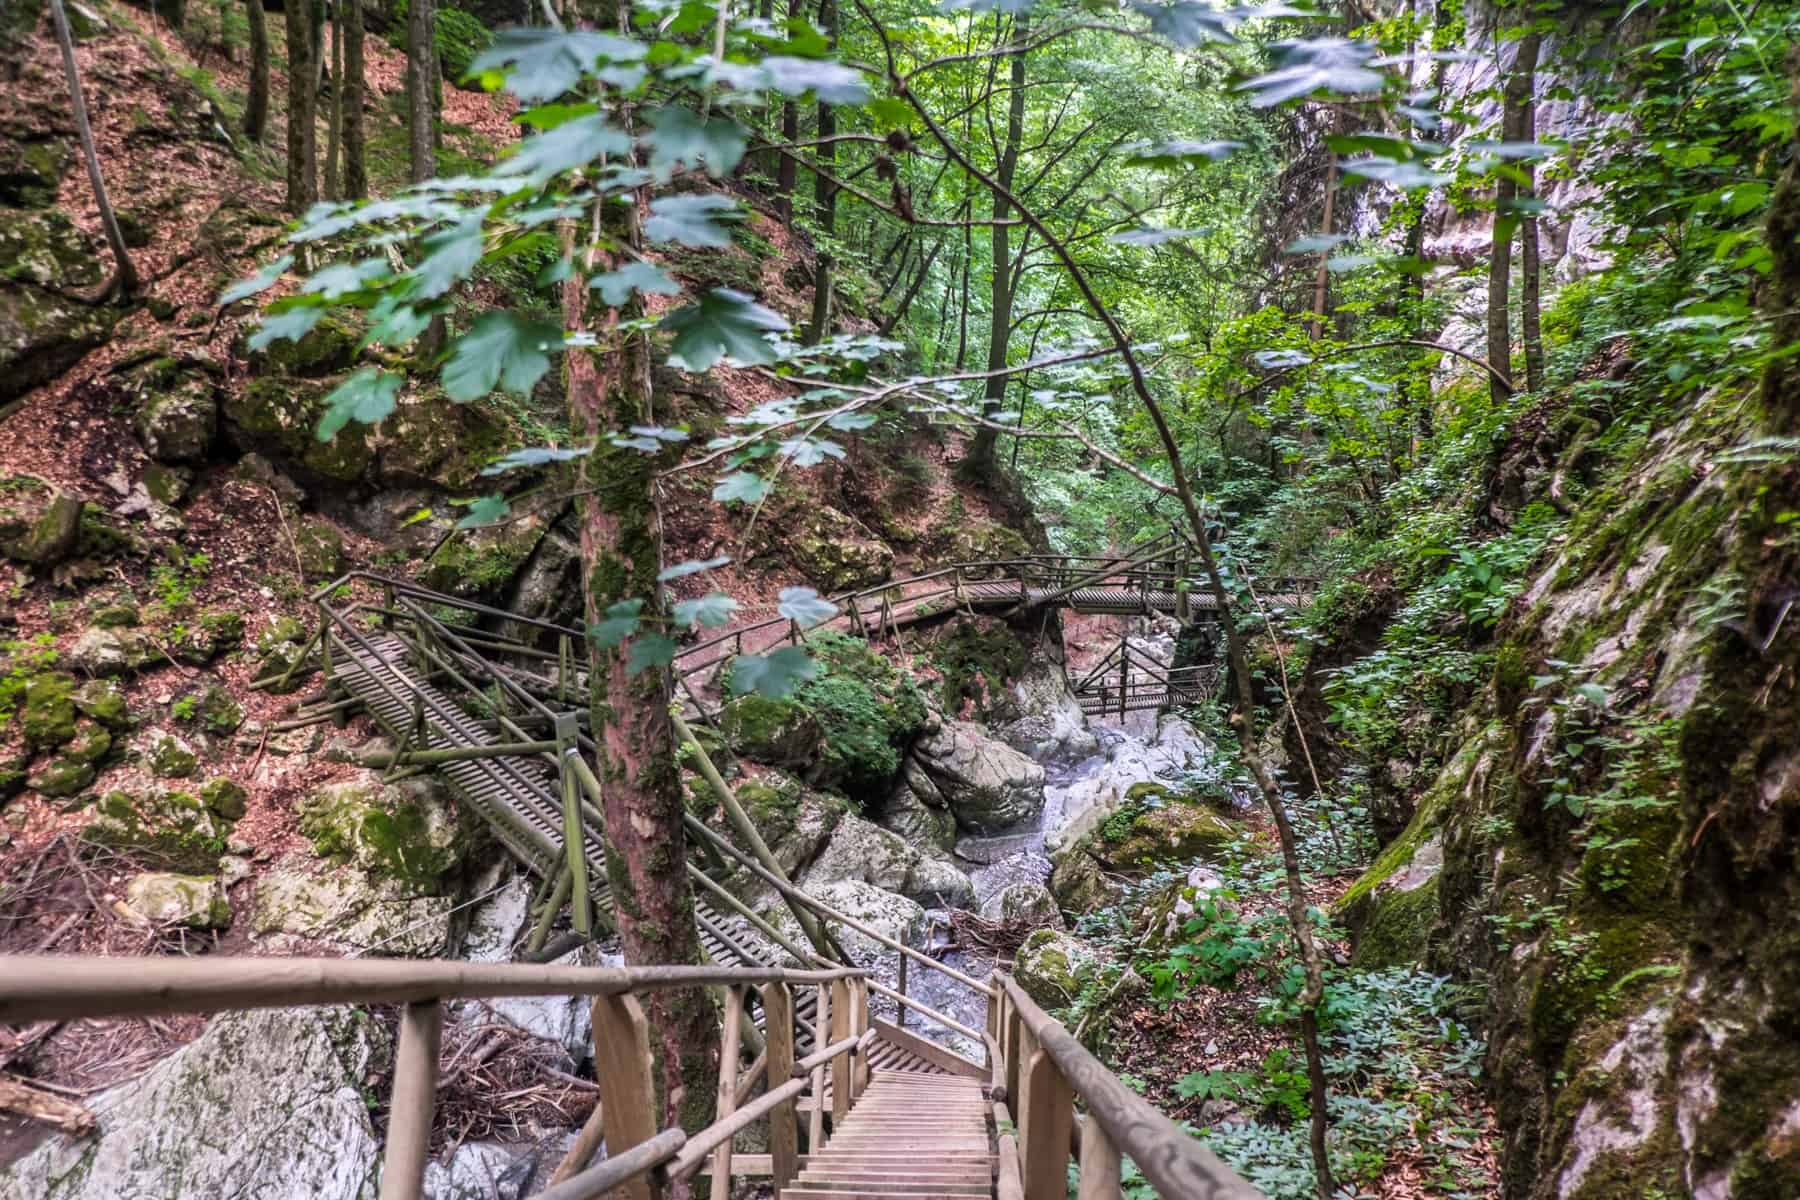 View from the top of a wooden walkway to a narrow stream and dense green woodland in Kesselfallklamm Graz